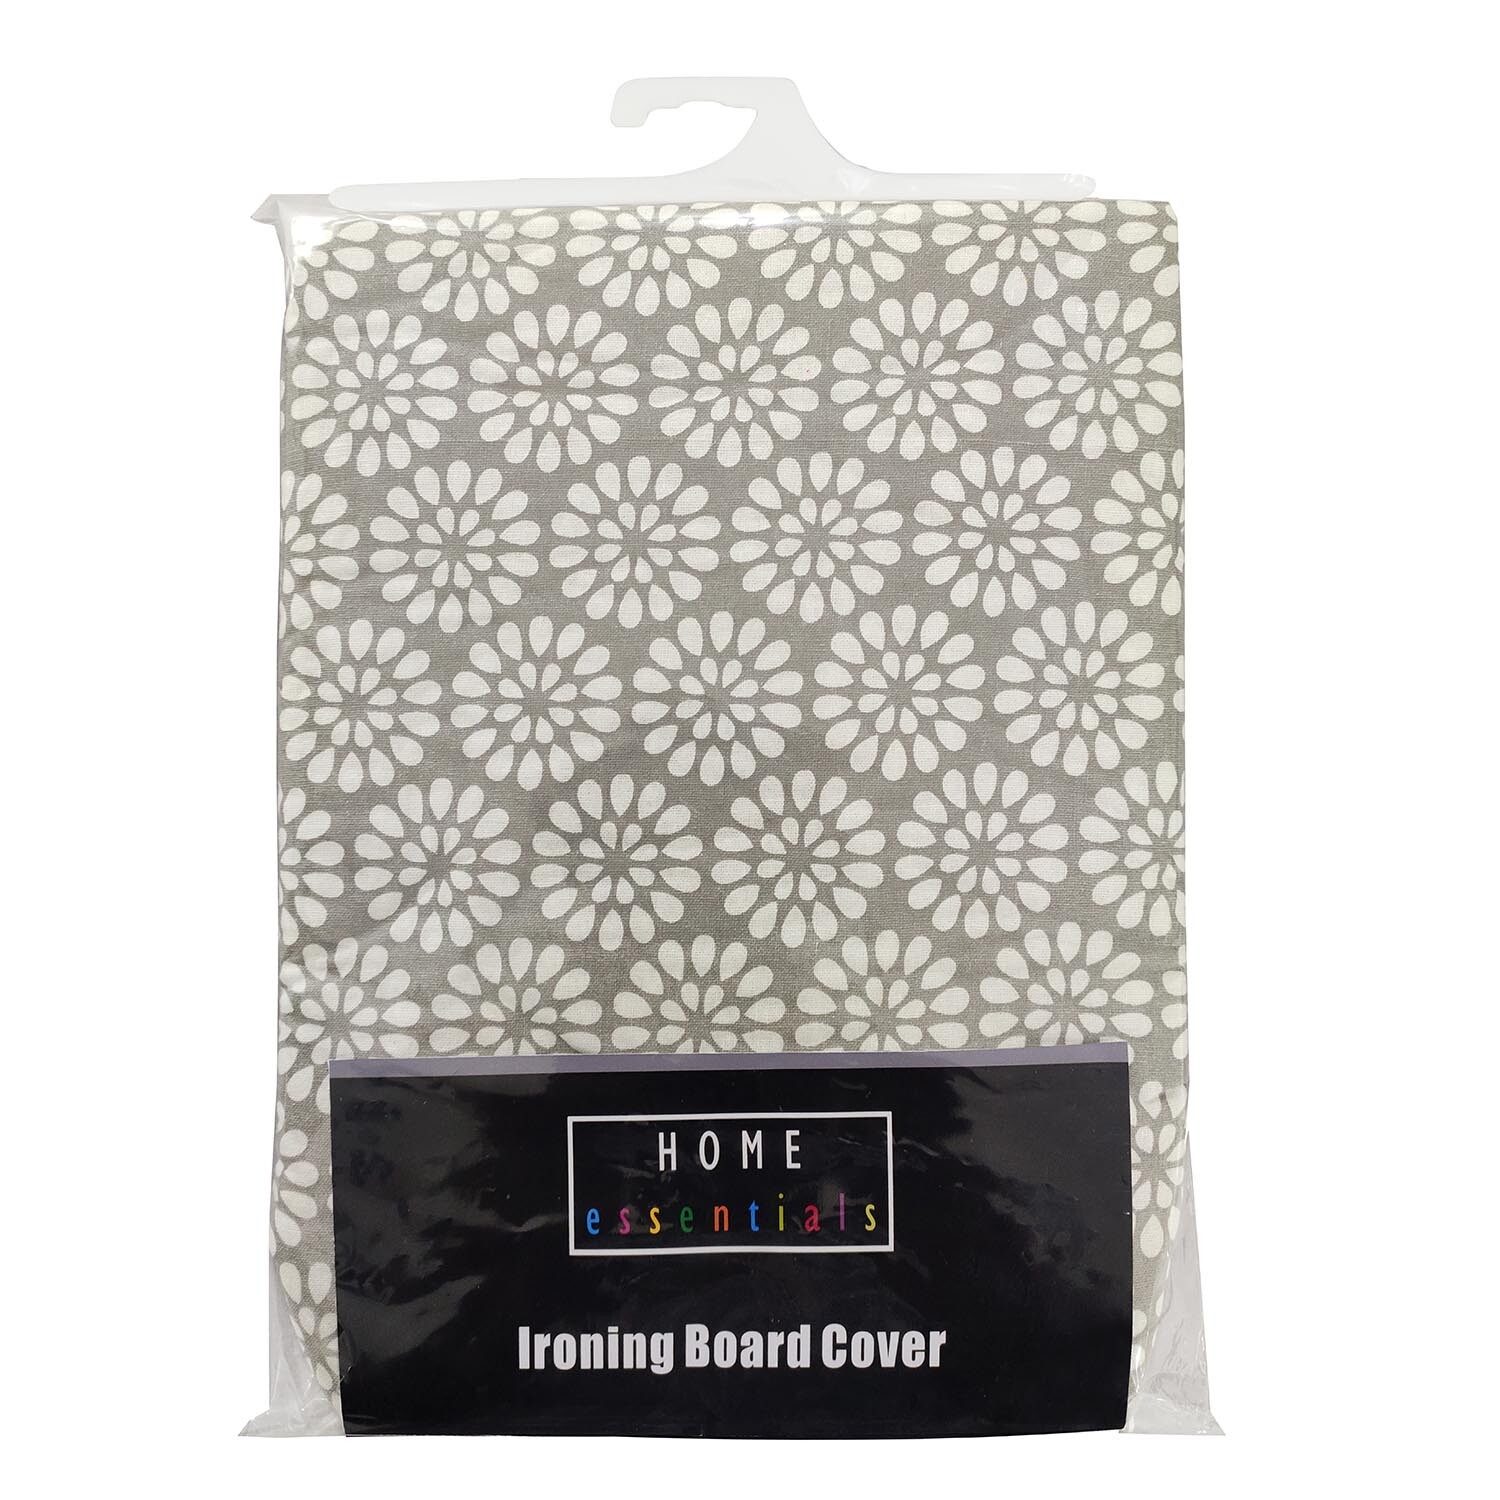 Ironing Board Cover - Small Image 3